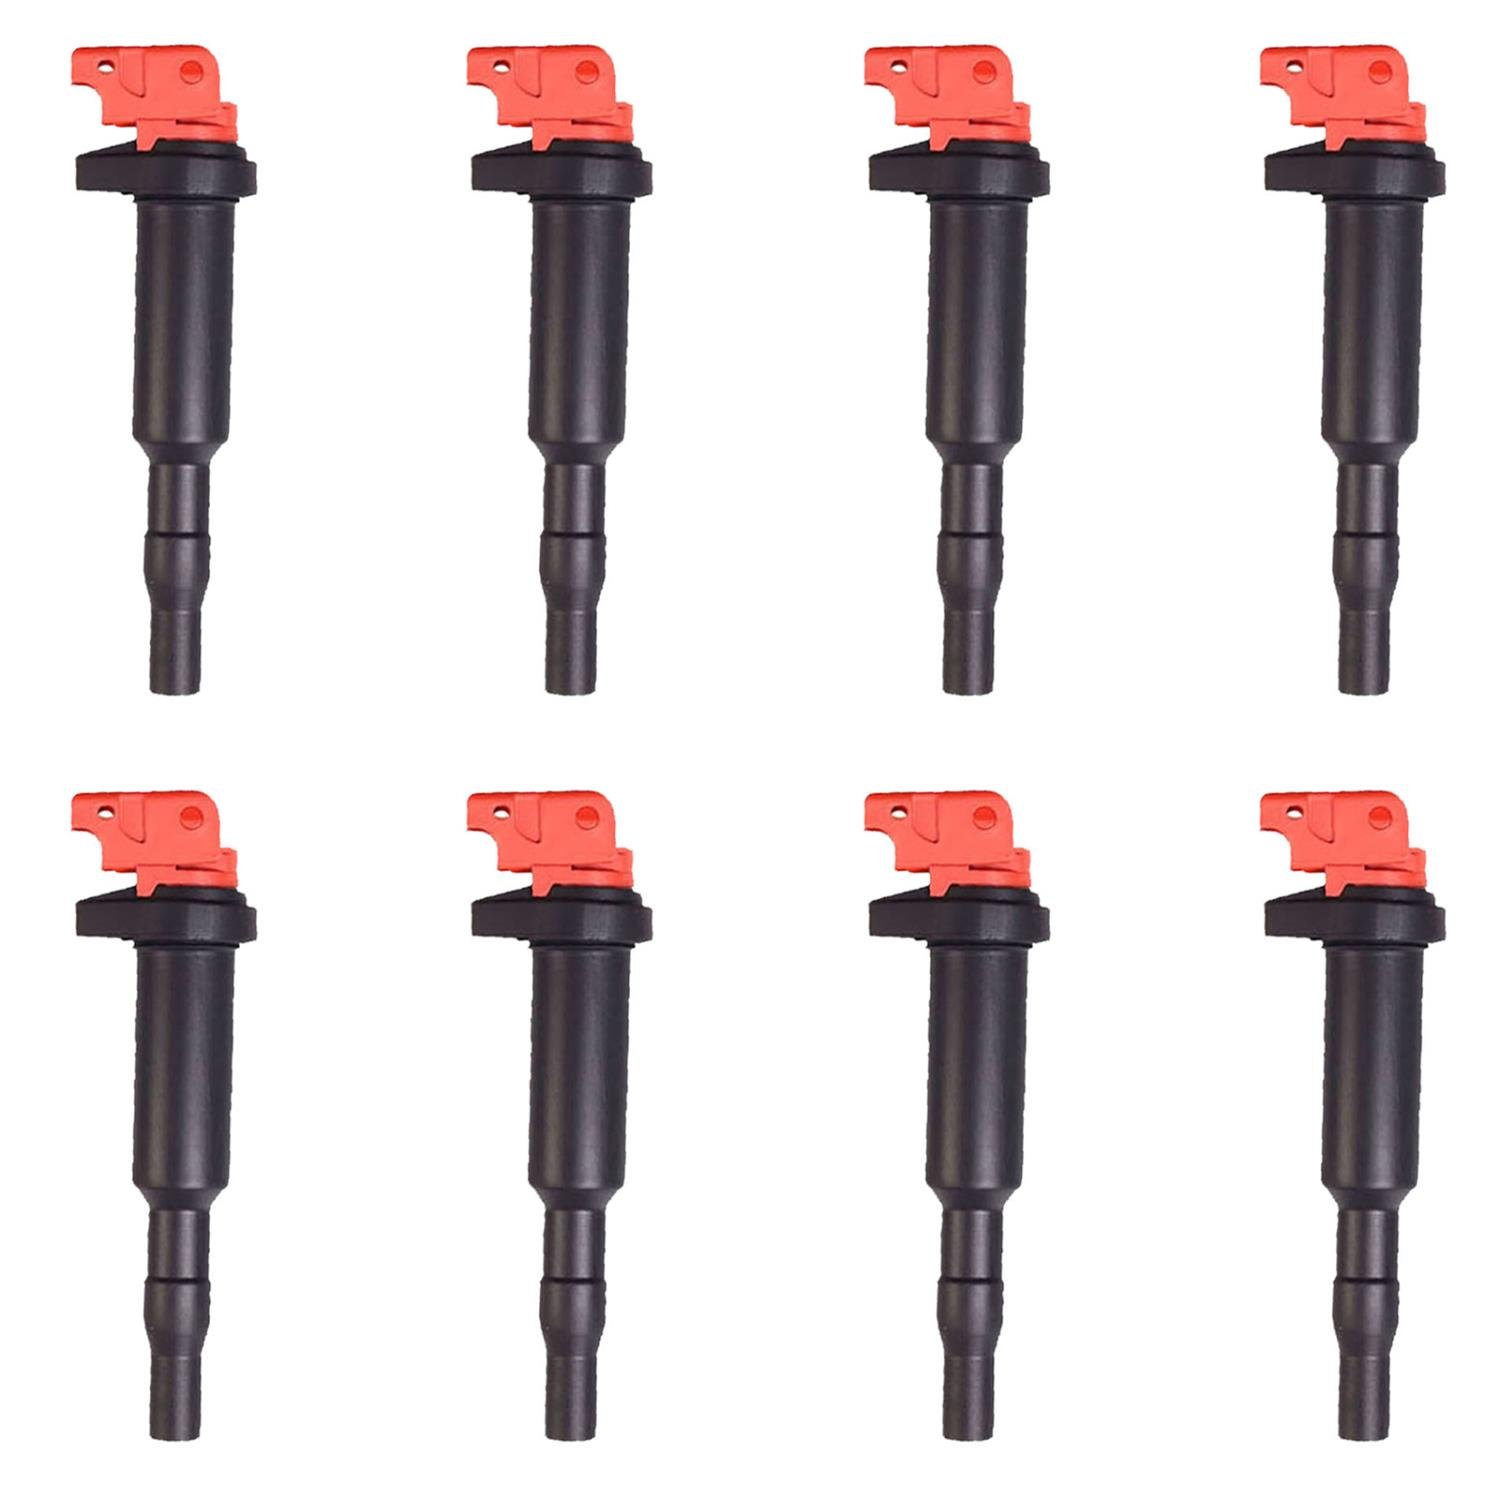 High-Performance Ignition Coils for 2007-2010 Mini Cooper [Red]